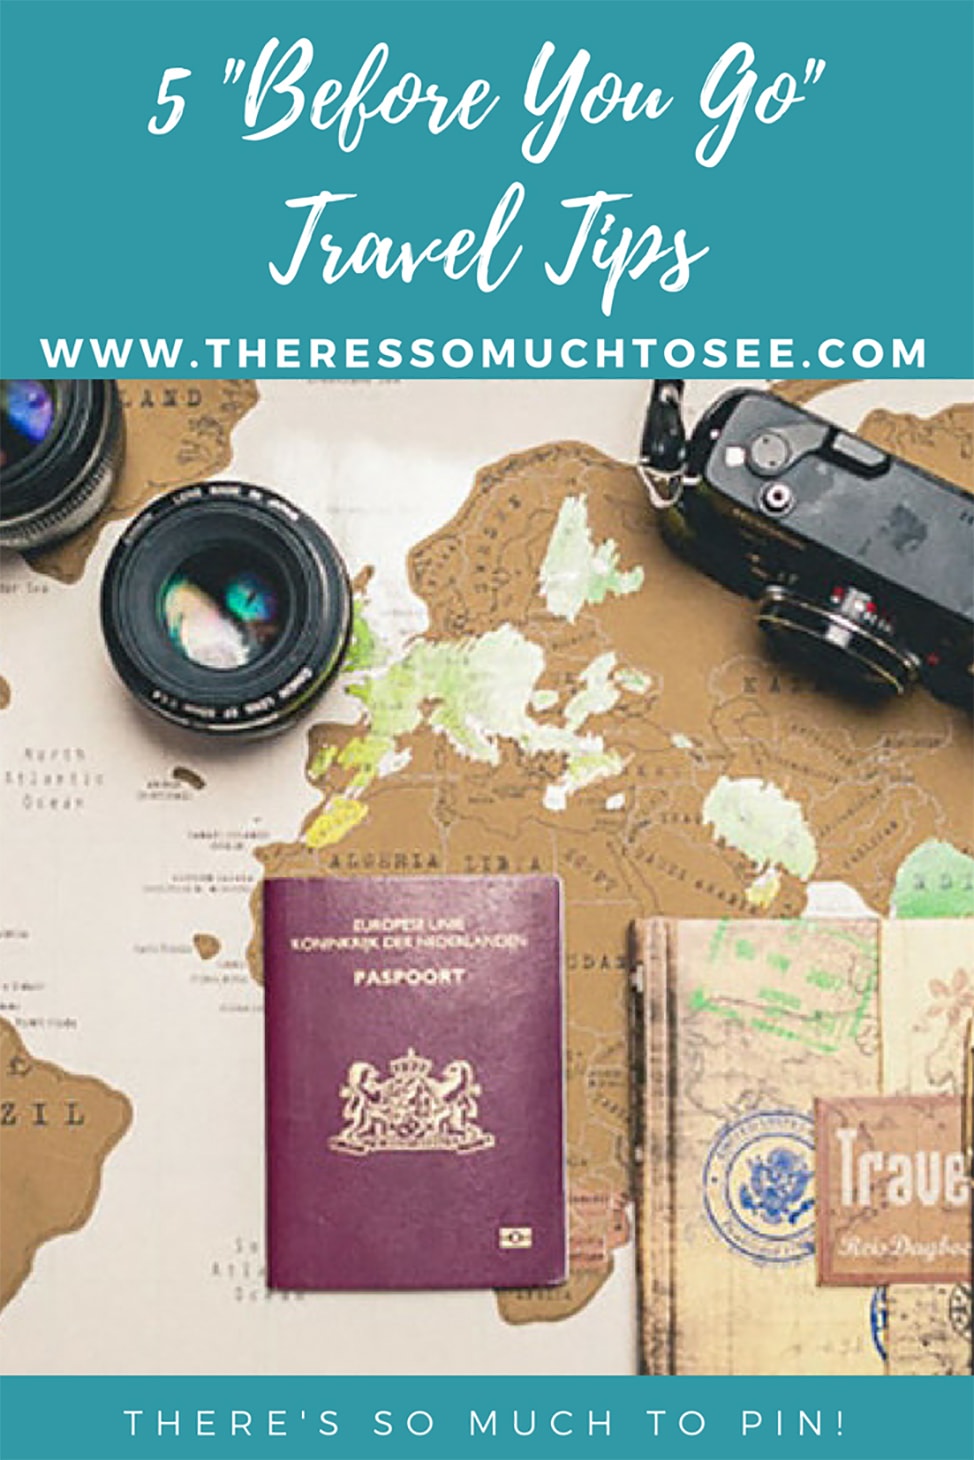 Pinnable Post for 5 Before You Go Travel Tips